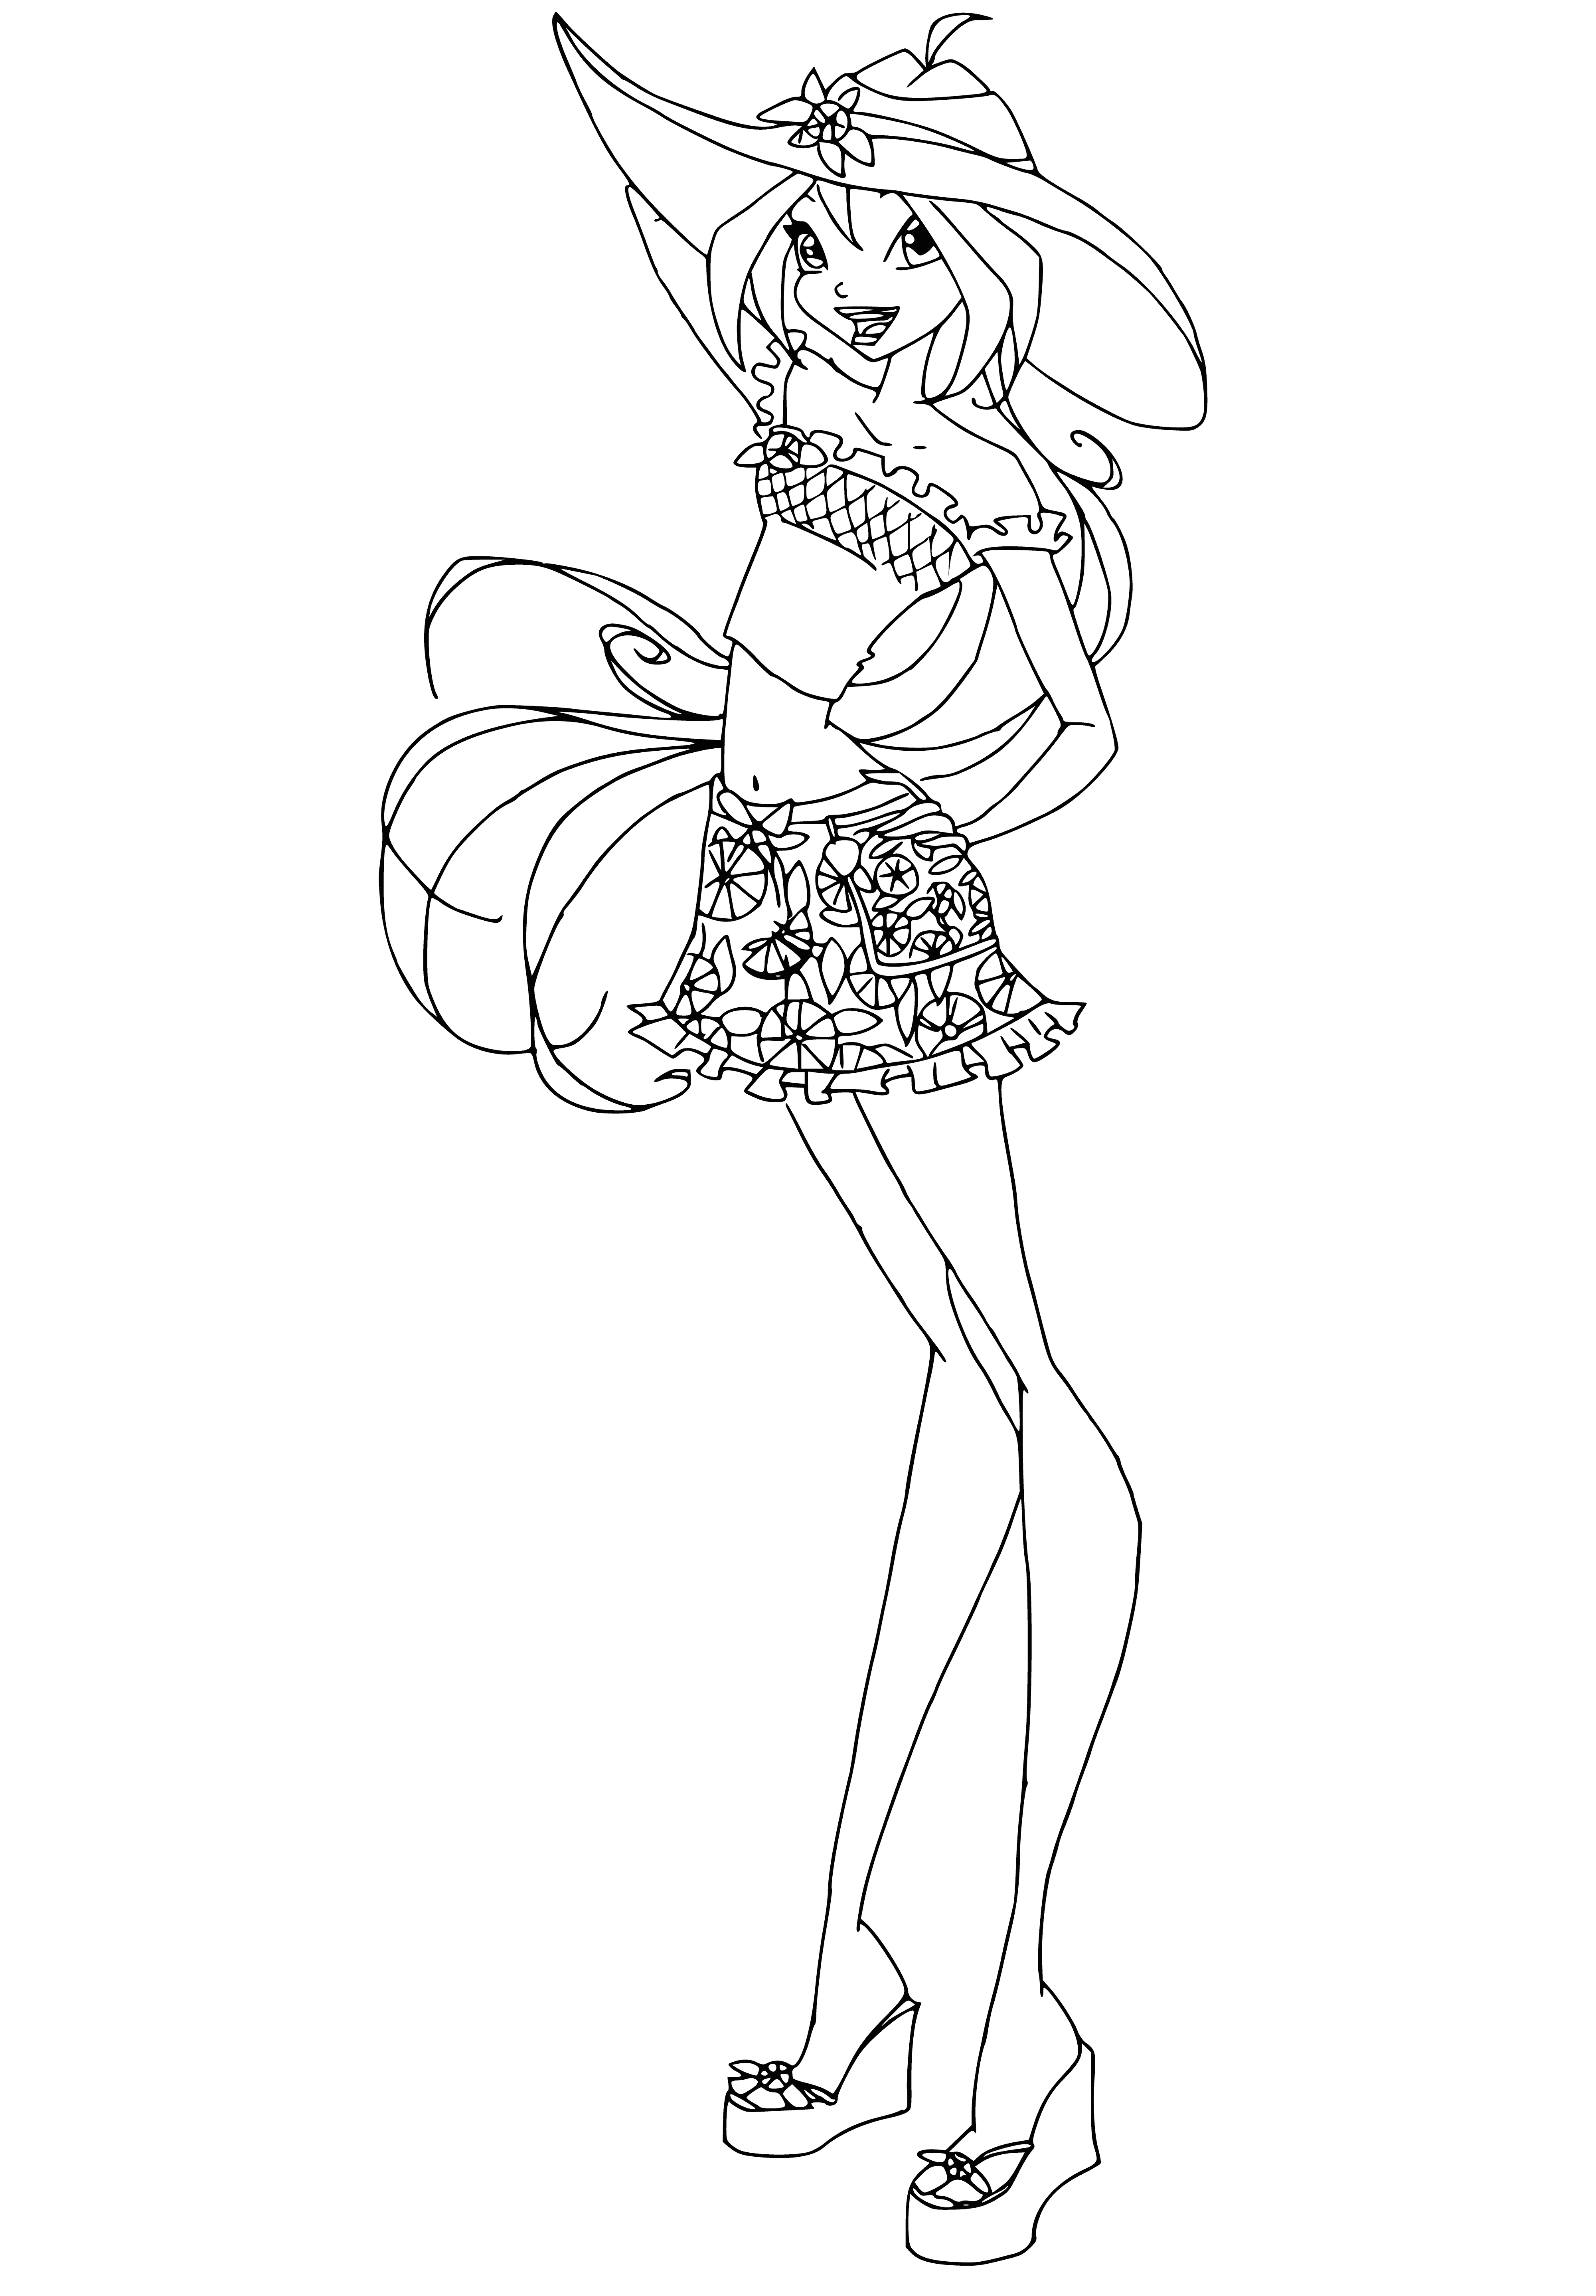 coloring page: Girl in white dress and green hat, holding a flower, with long brown hair. #coloringpages #flowerpower